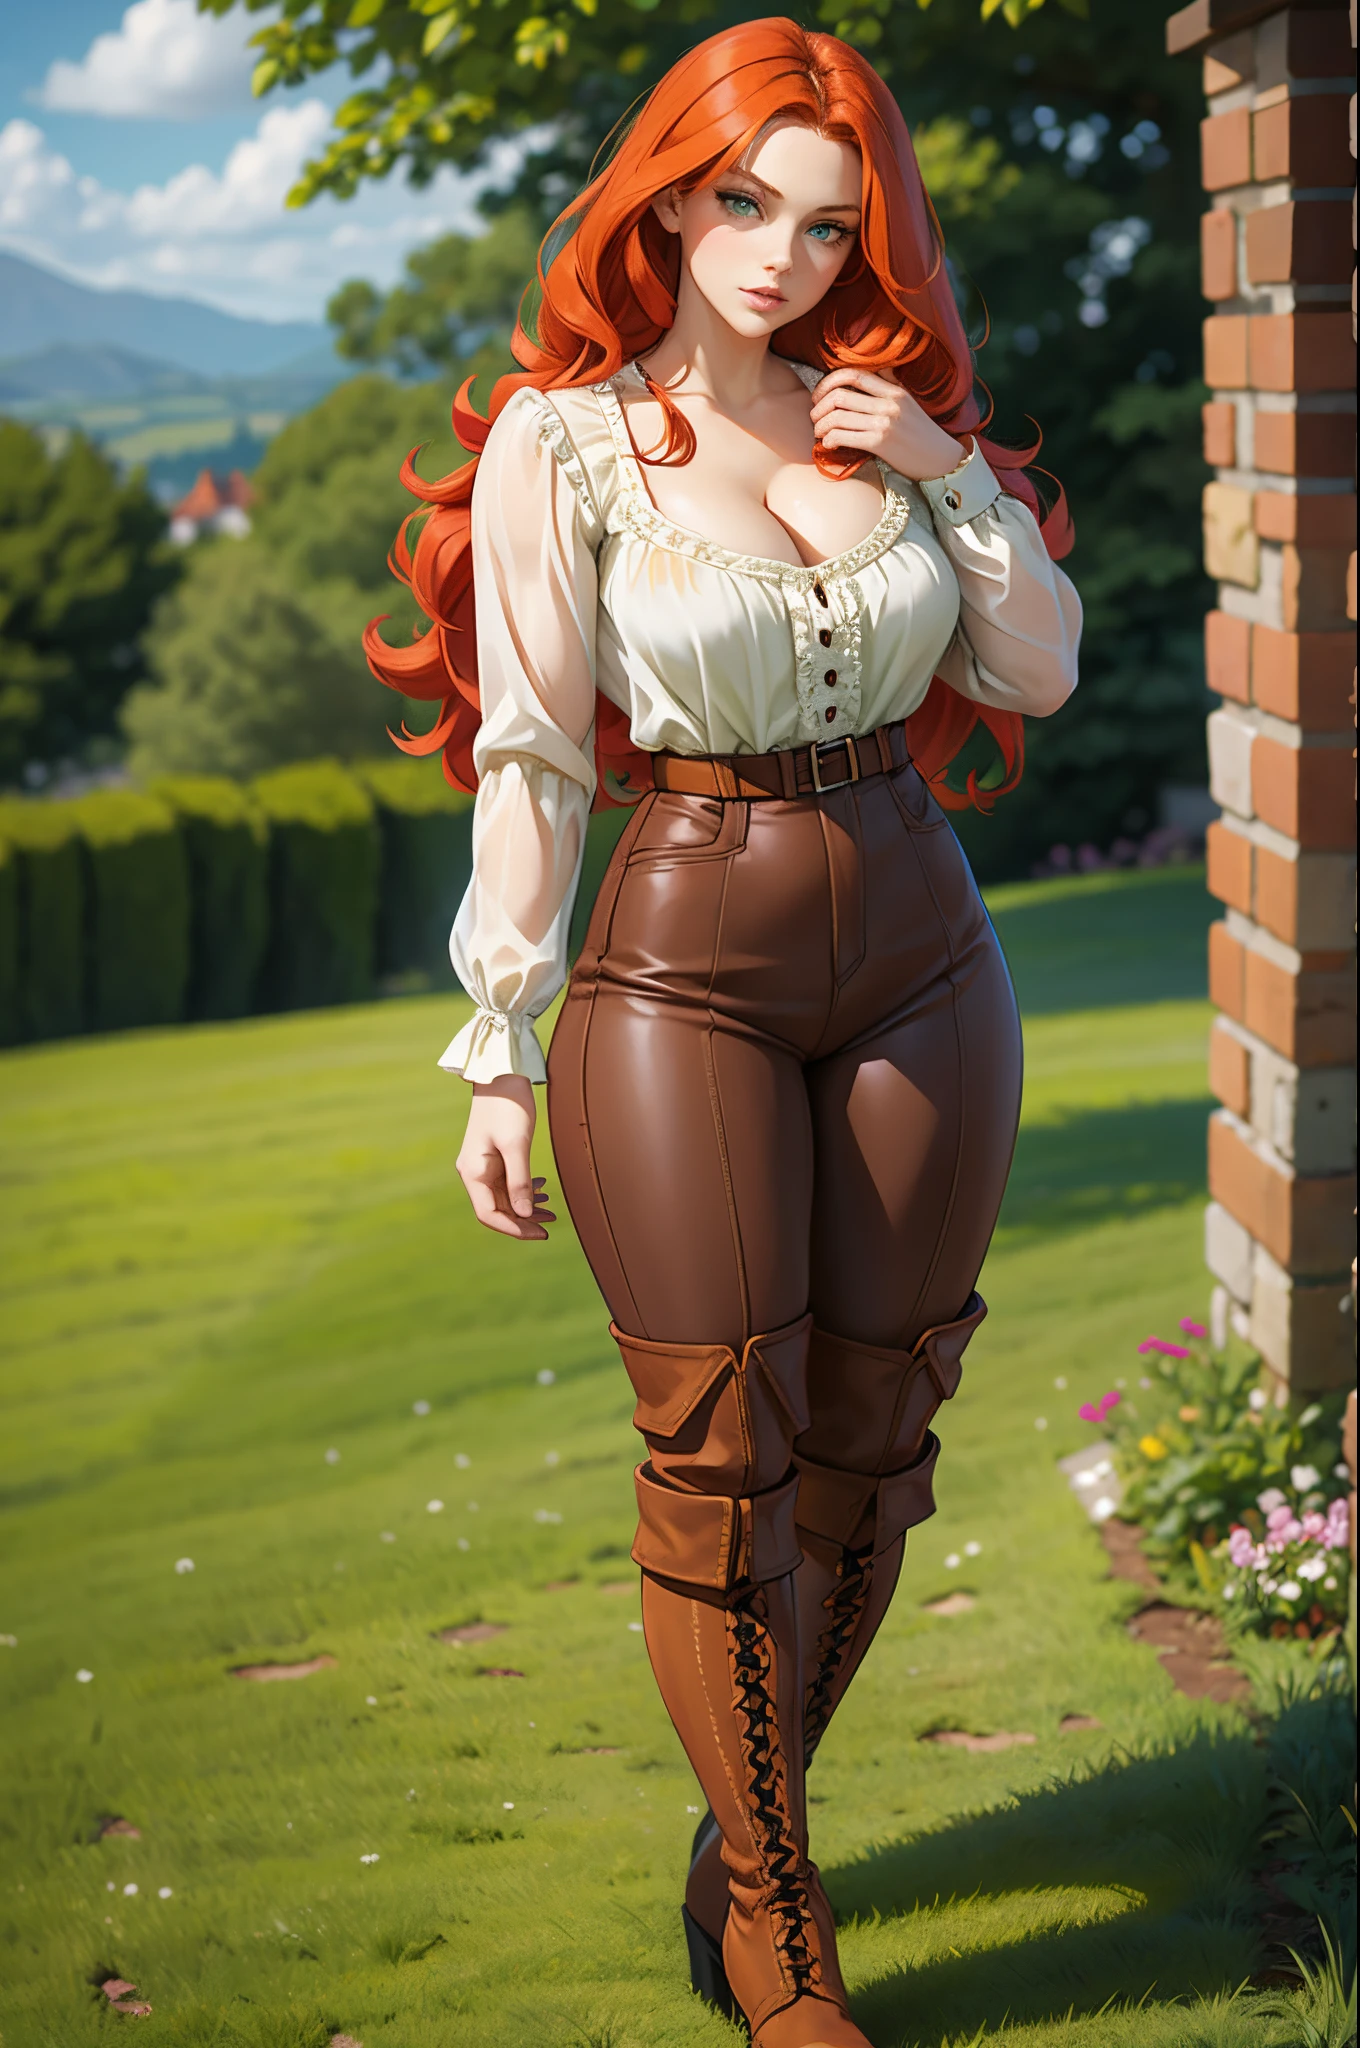 1woman,redhead,ginger,green eyes,fine face,fine lips,British descent,(muscular),long hair,wavy hair,cottage blouse,cleavage blouse,Victorian blouse,lether pants,long boots,lether boots,Slouchy over-the-knee boots